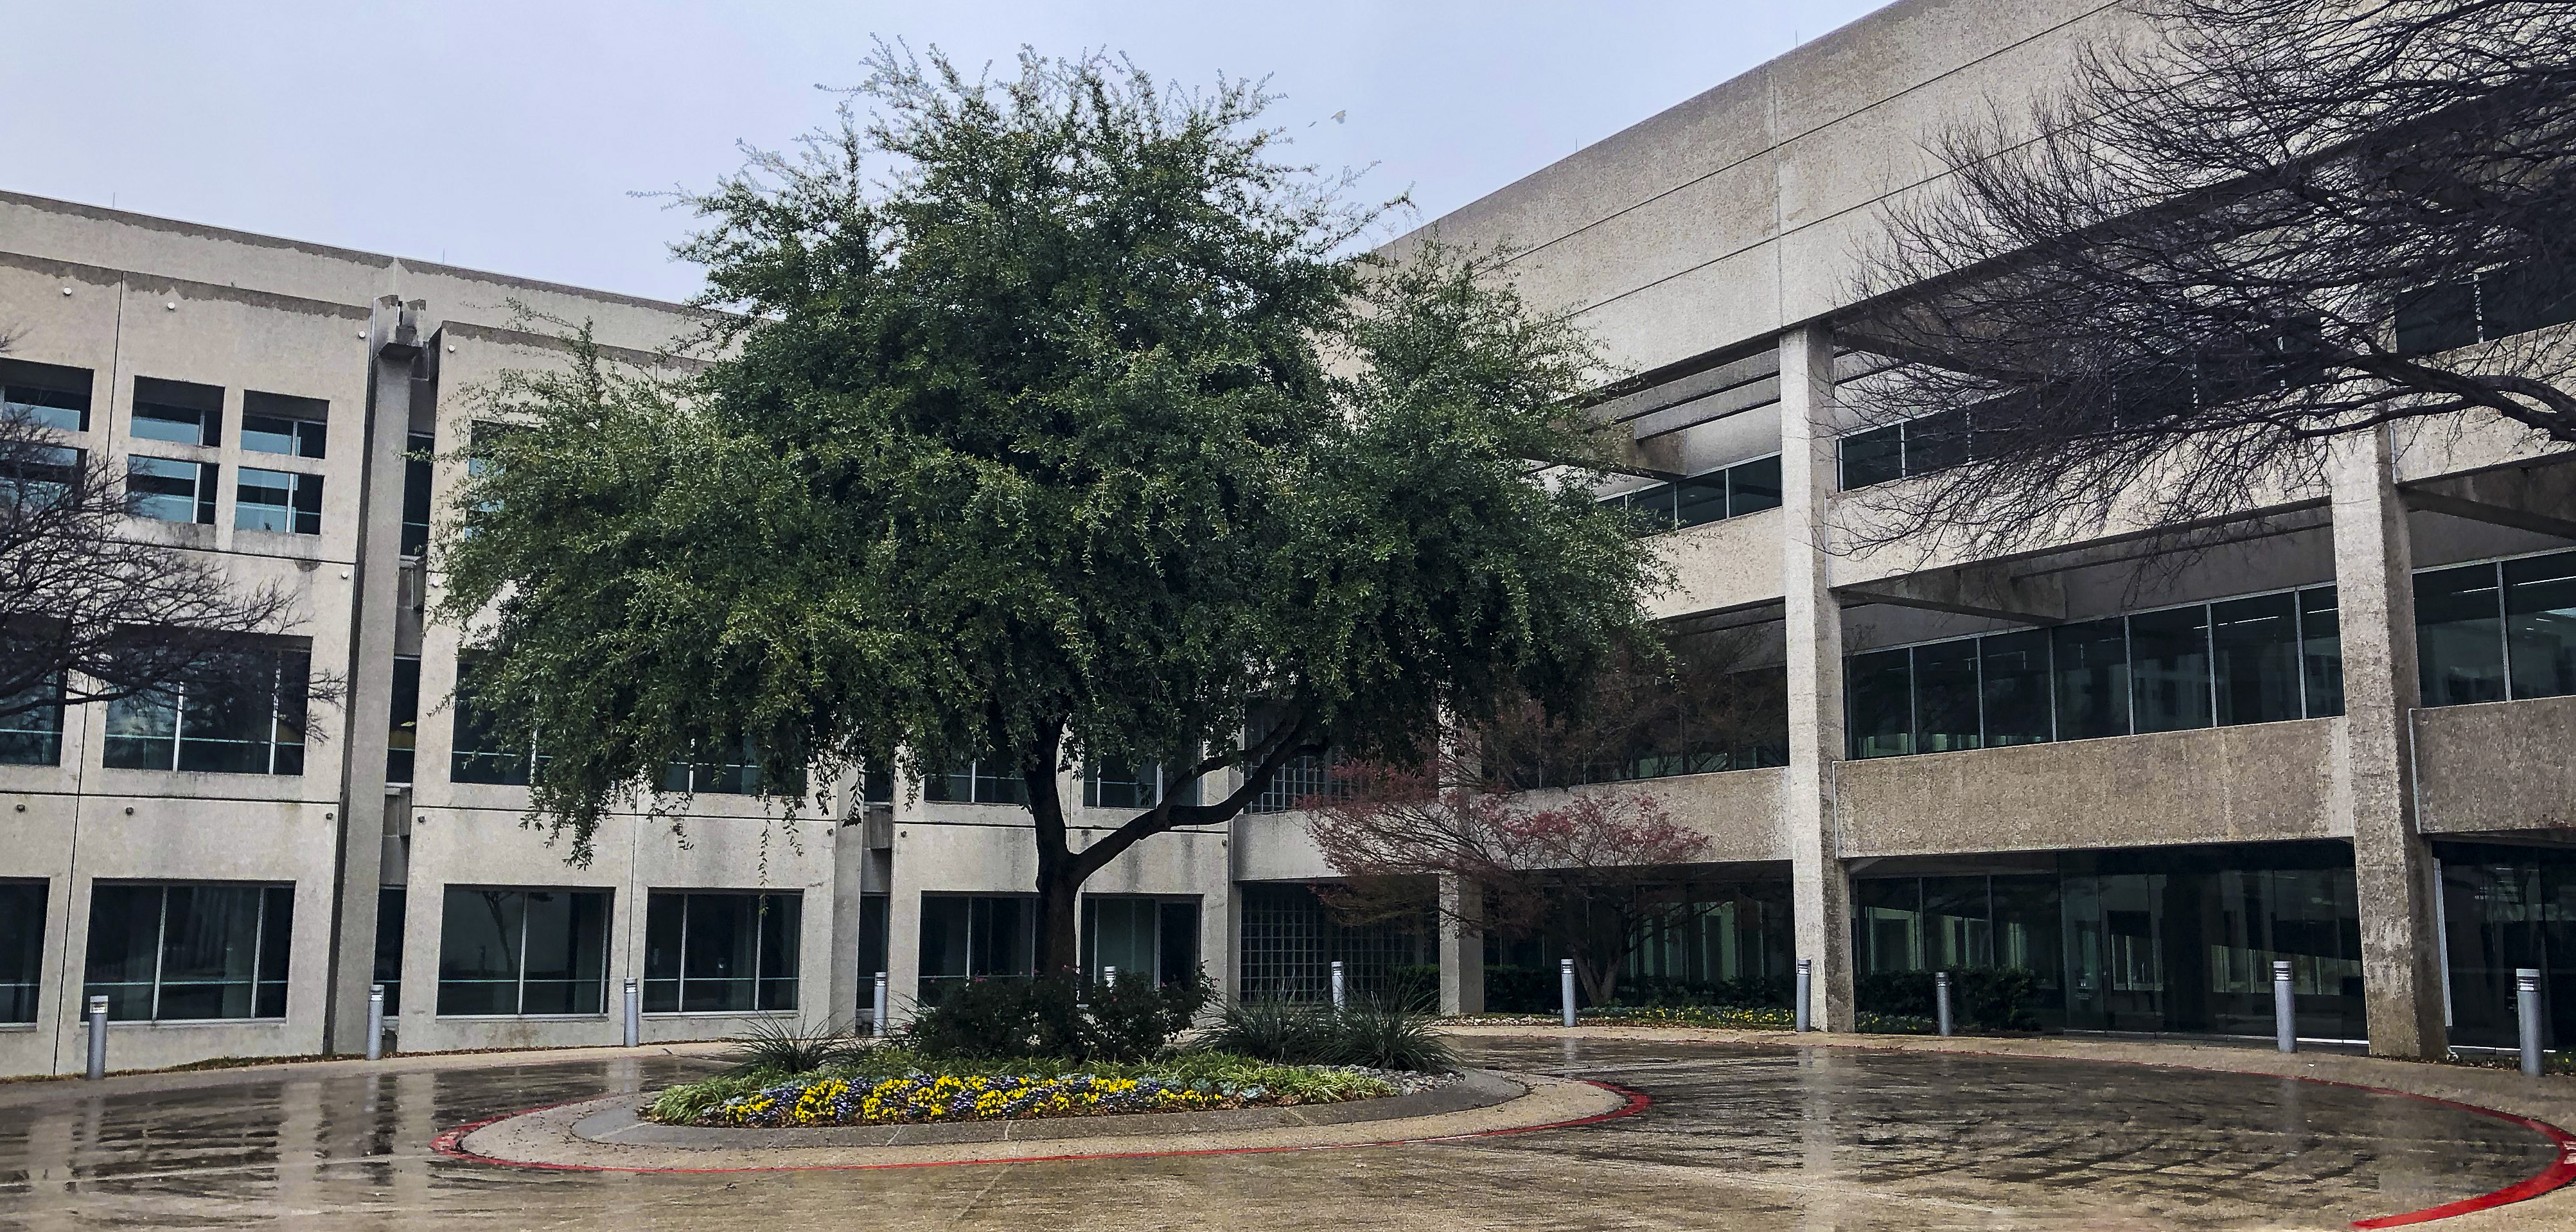 The workspace will be located in the Las Colinas Office Center submarket. [Photo: Courtesy Varidesk]